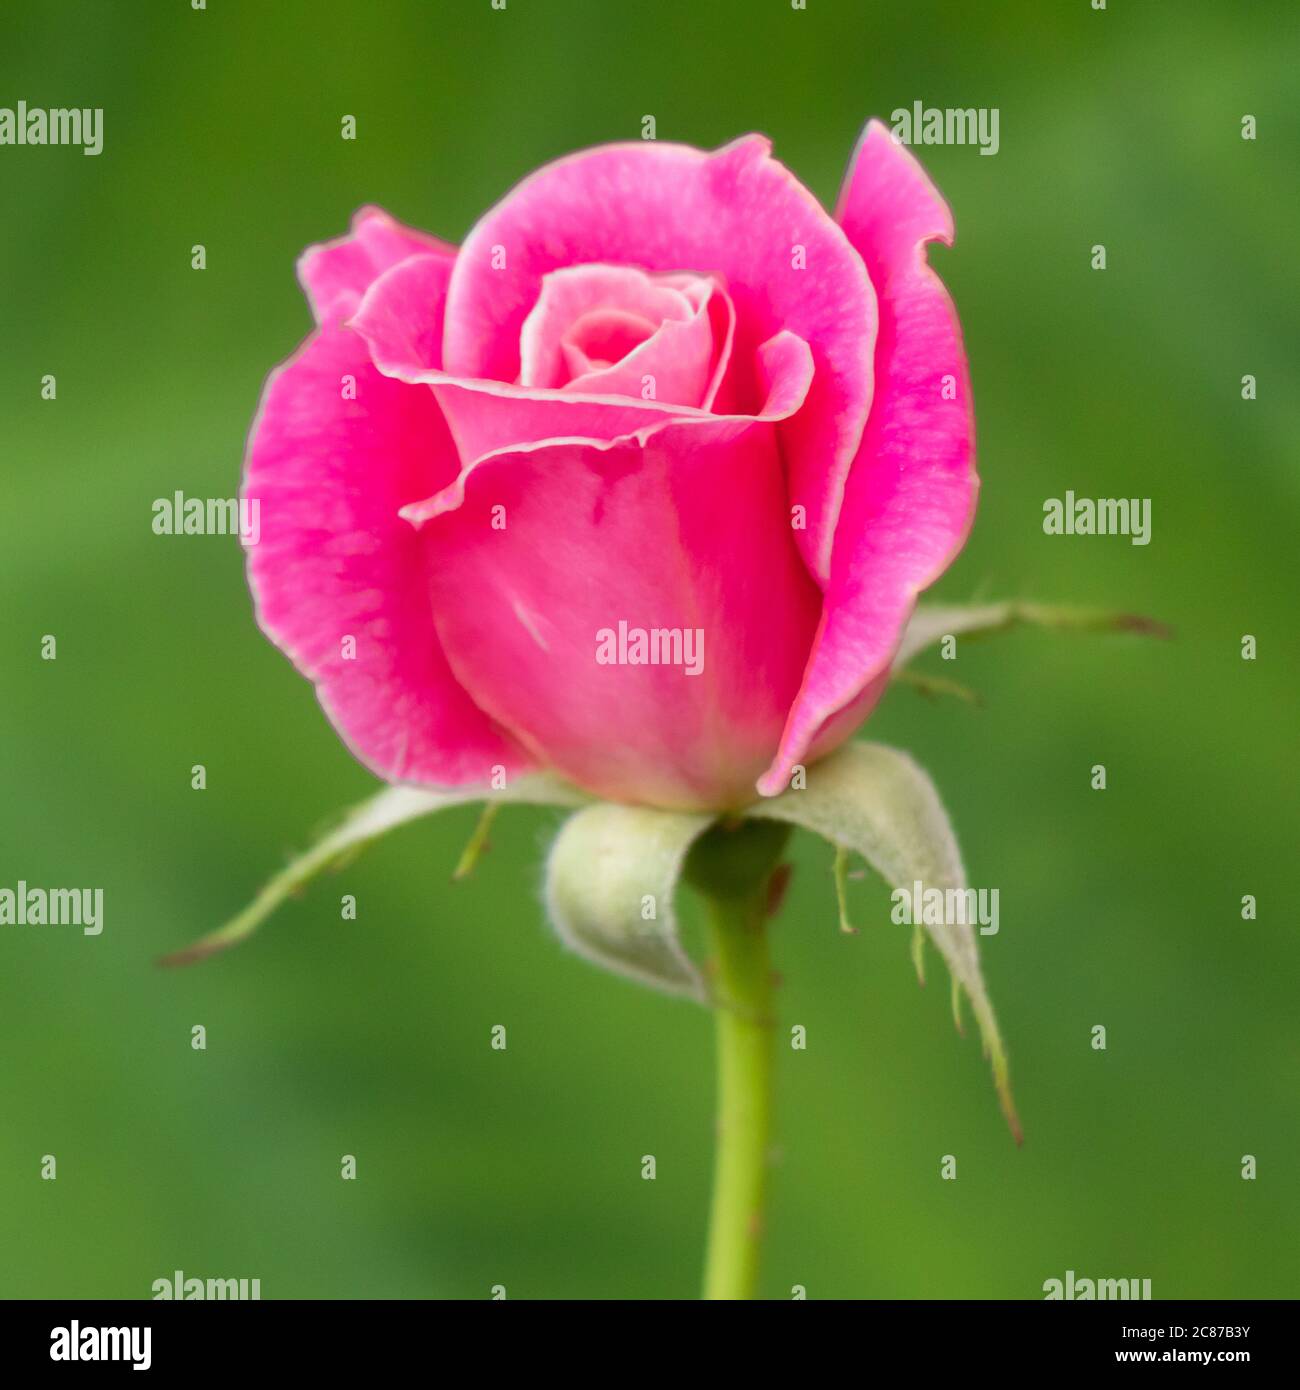 Beautiful pink rose over green burly background, selective focus Stock Photo